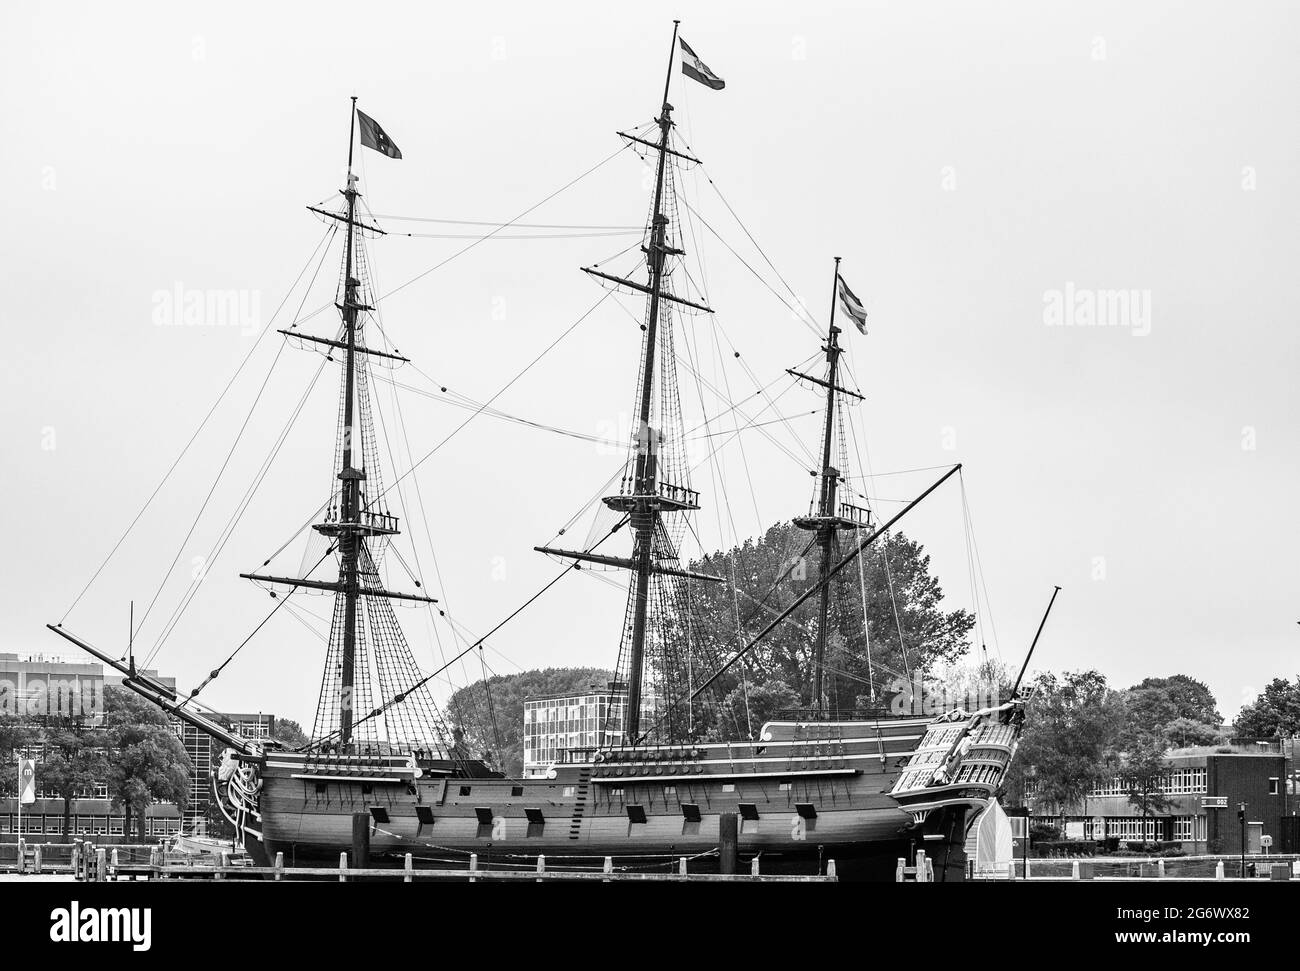 AMSTERDAM, NETHERLANDS. JUNE 06, 2021. Old wooden Stad Amsterdam ship. Black and white photography Stock Photo